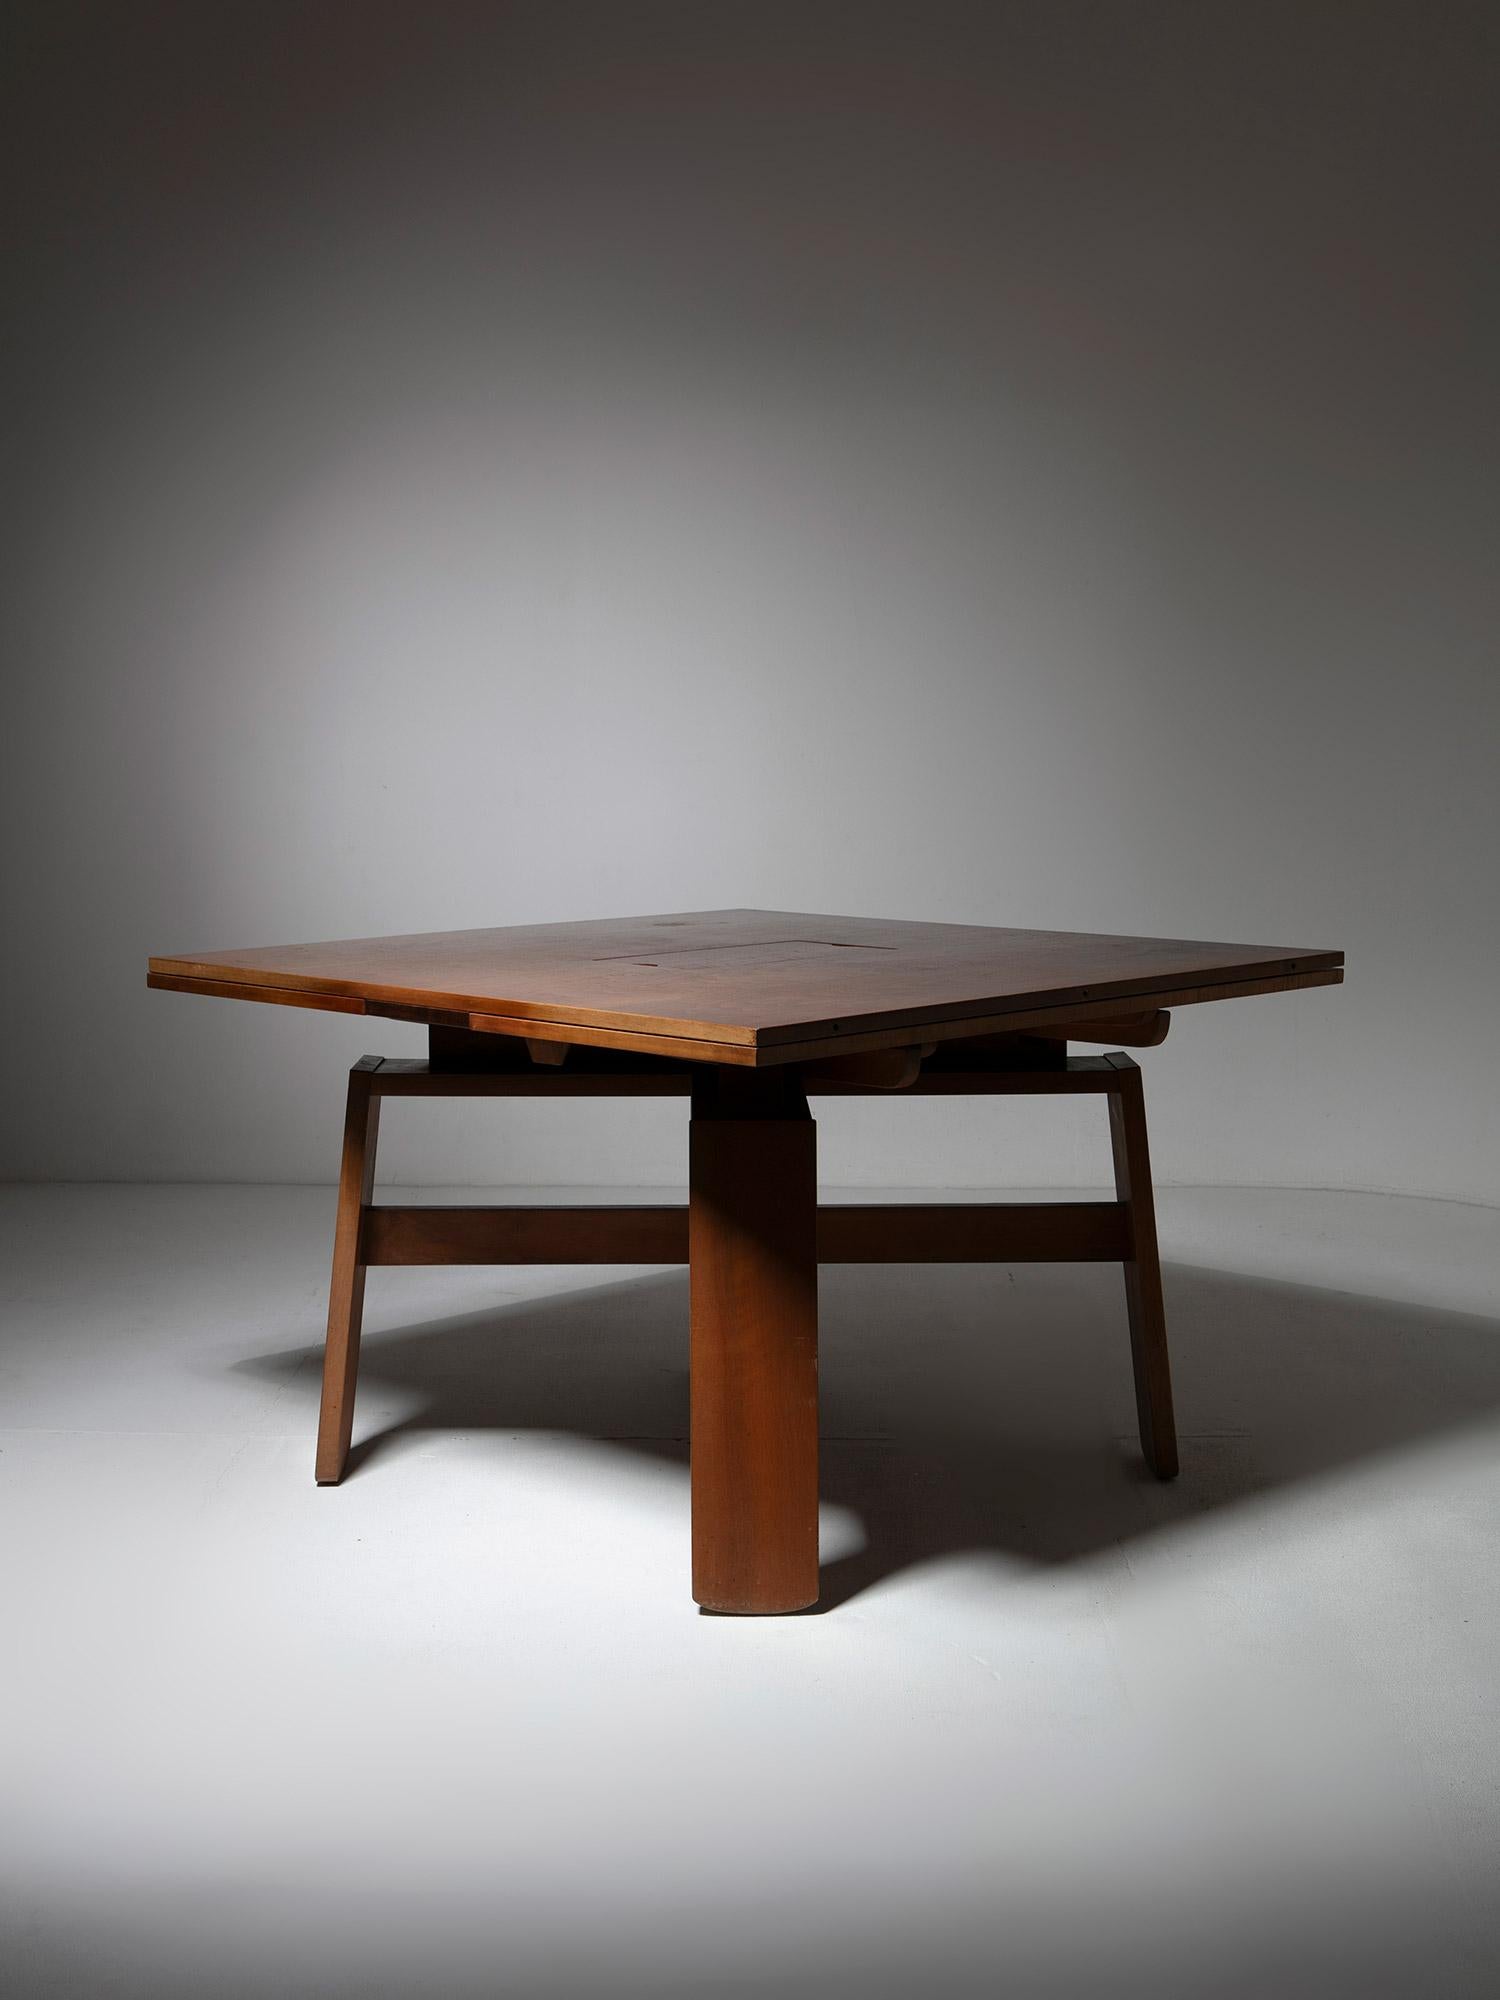 Extendible dining table model 612.1 by Sivlio Coppola for Bernini.
Sculptural walnut frame supporting a squared top with hidden wings and two white ceramic trays.
Width goes from cms 115 to 210 